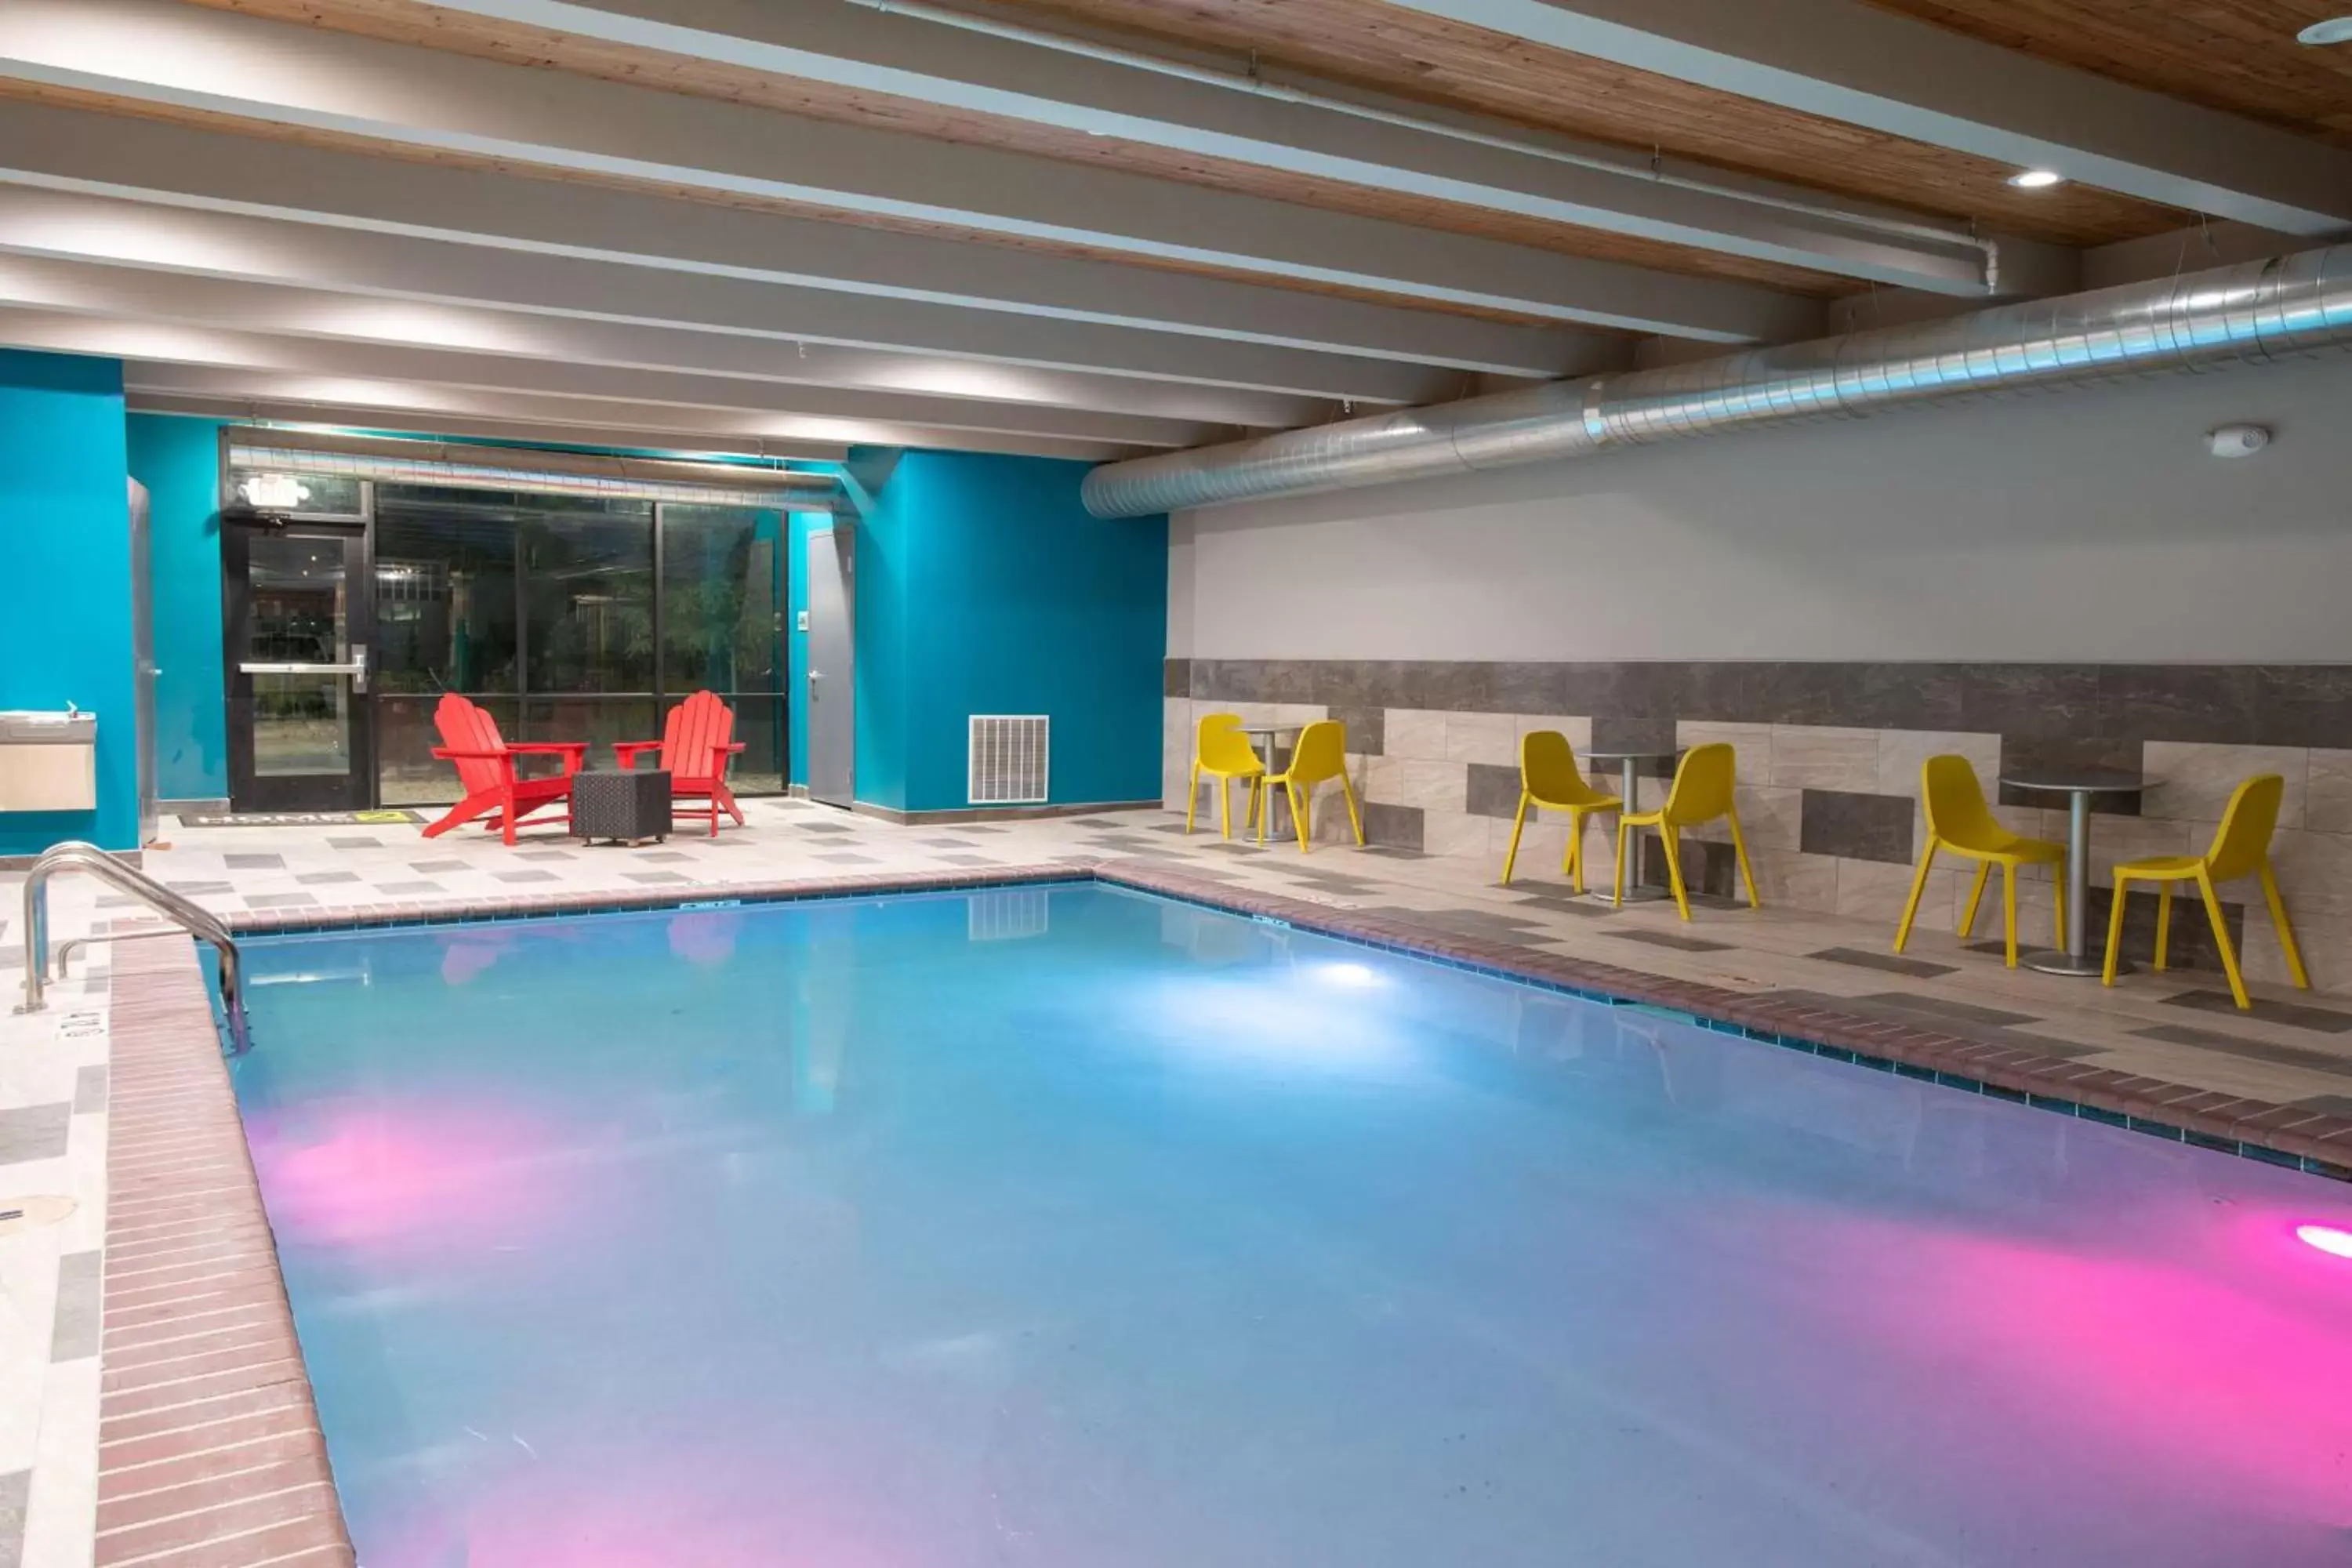 Swimming Pool in Home2 Suites by Hilton Roswell, NM